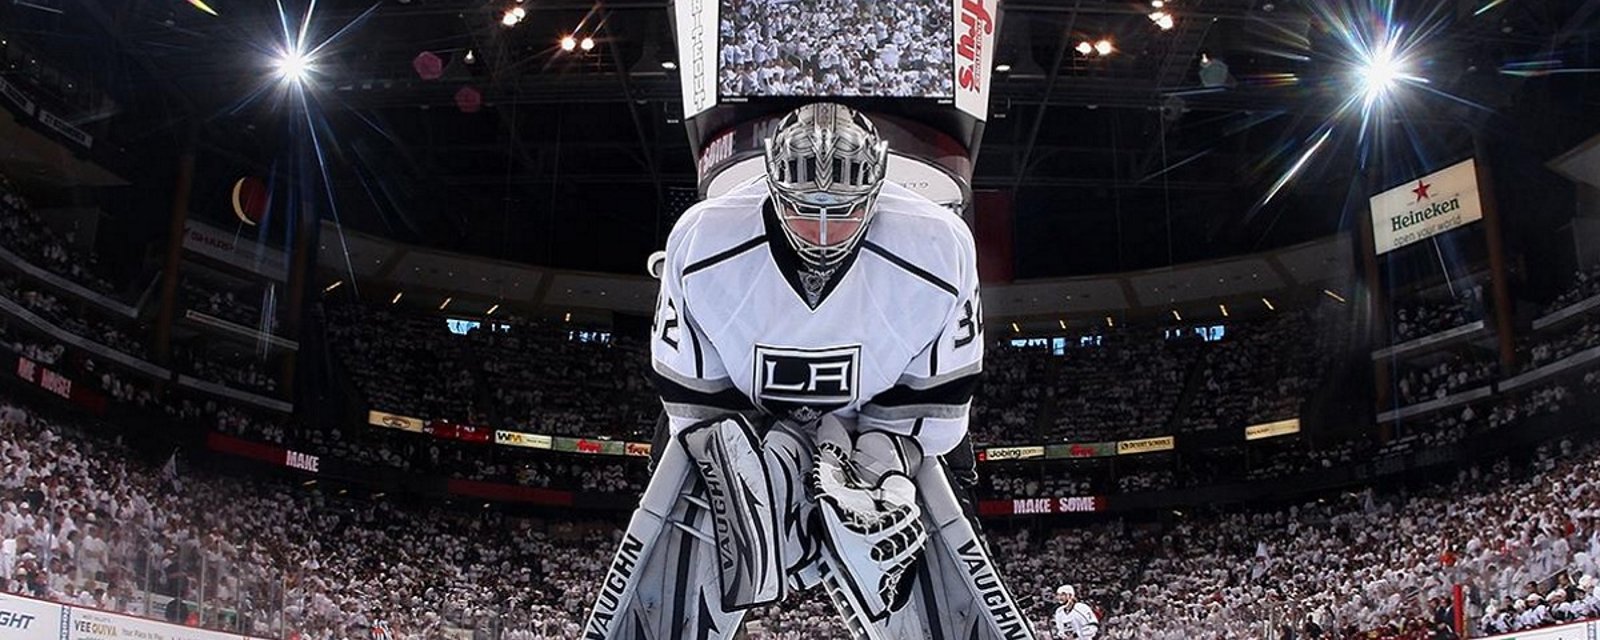 Do you have what it takes to be an NHL goalie? The LA Kings want YOU!